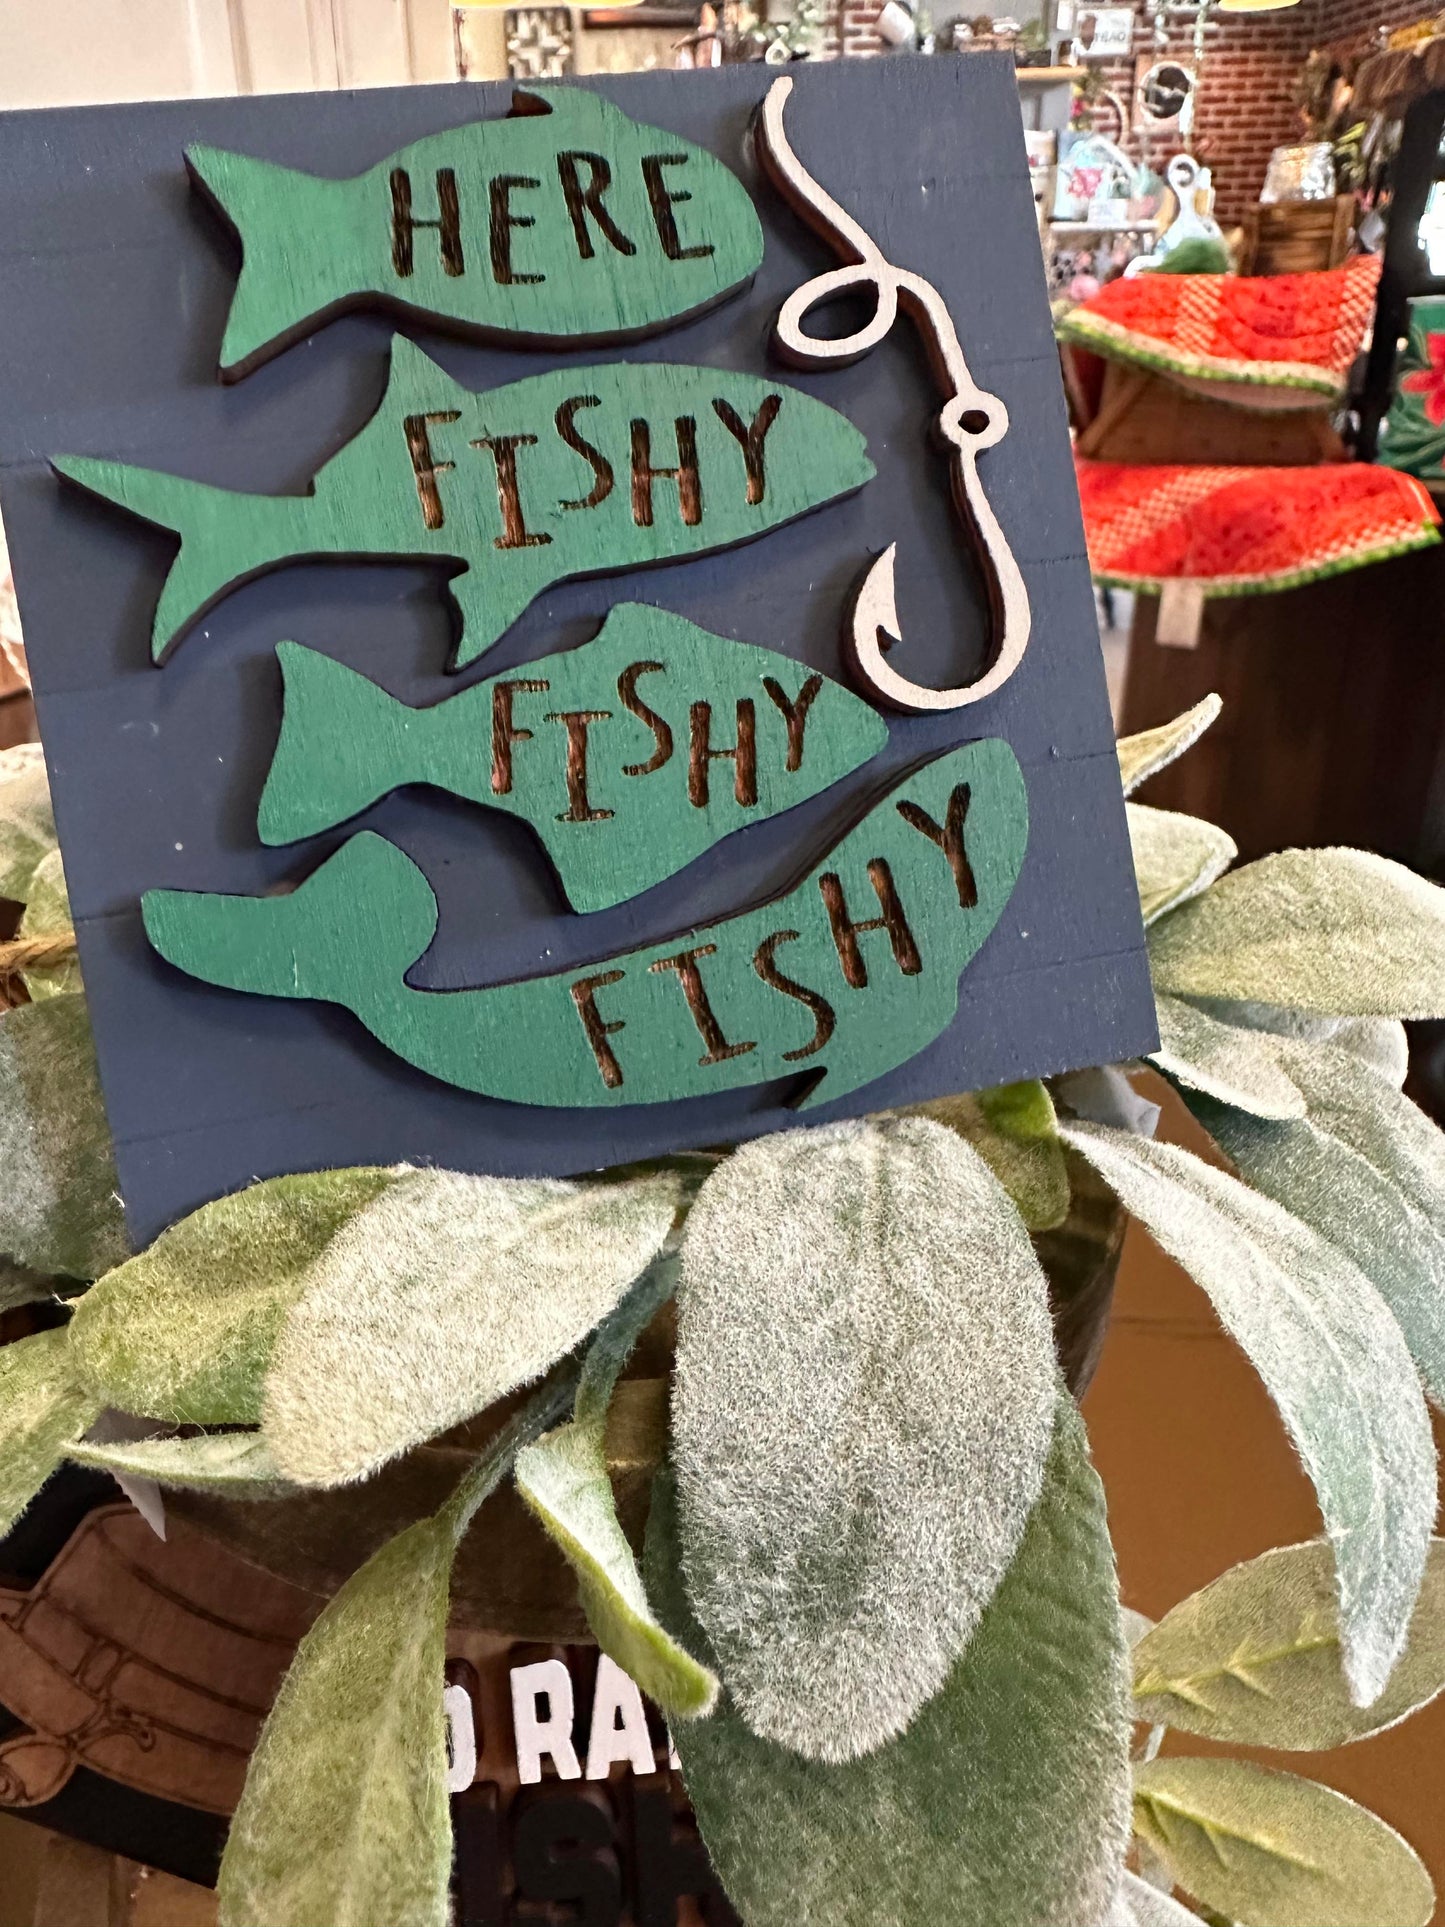 3D Tiered Tray Decor - Fishing